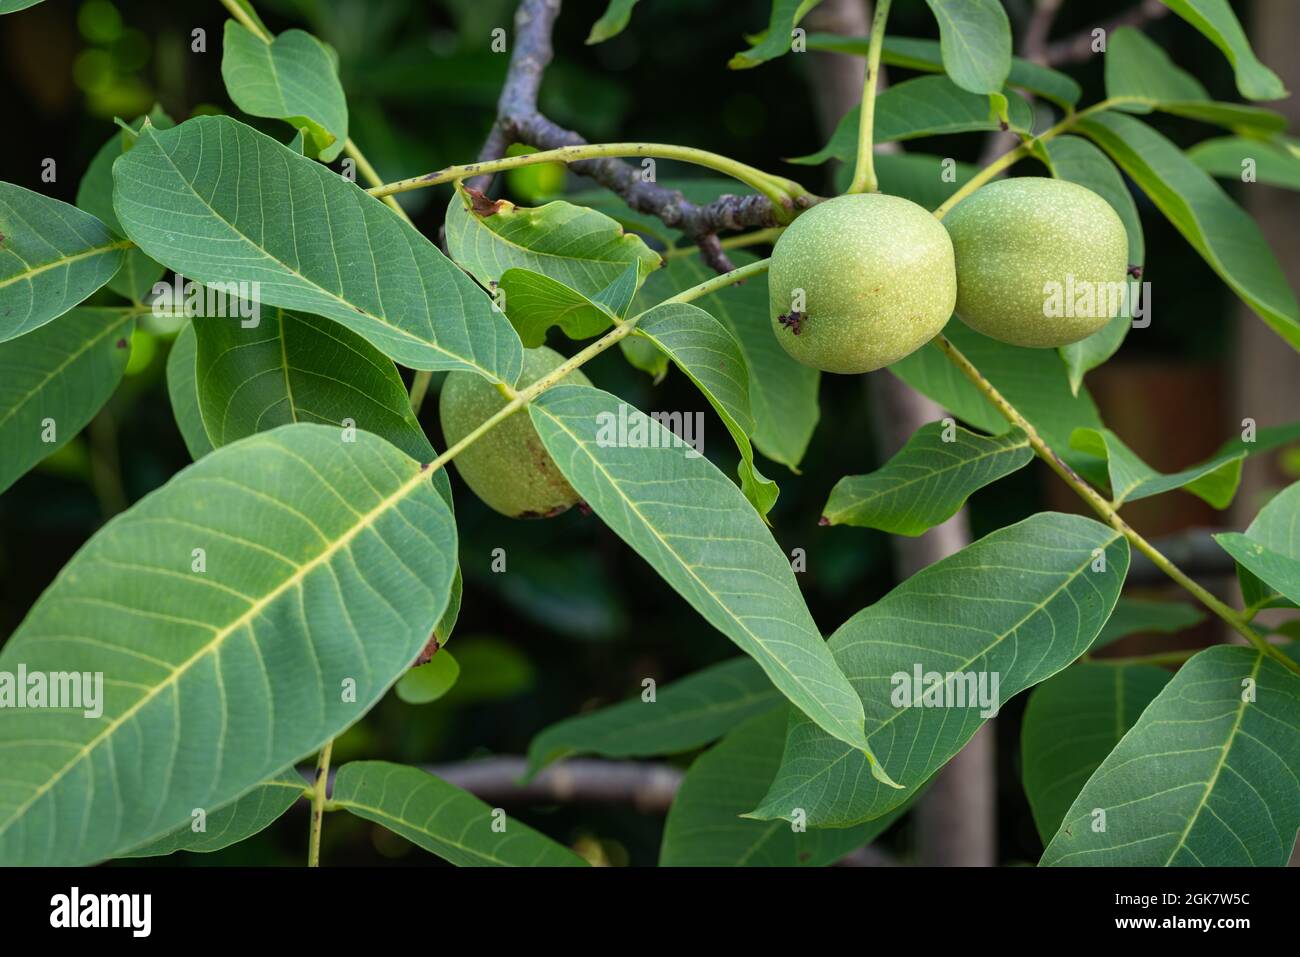 Unripe walnuts - juglans regia - in the fruit coat on the tree before harvesting in autumn Stock Photo